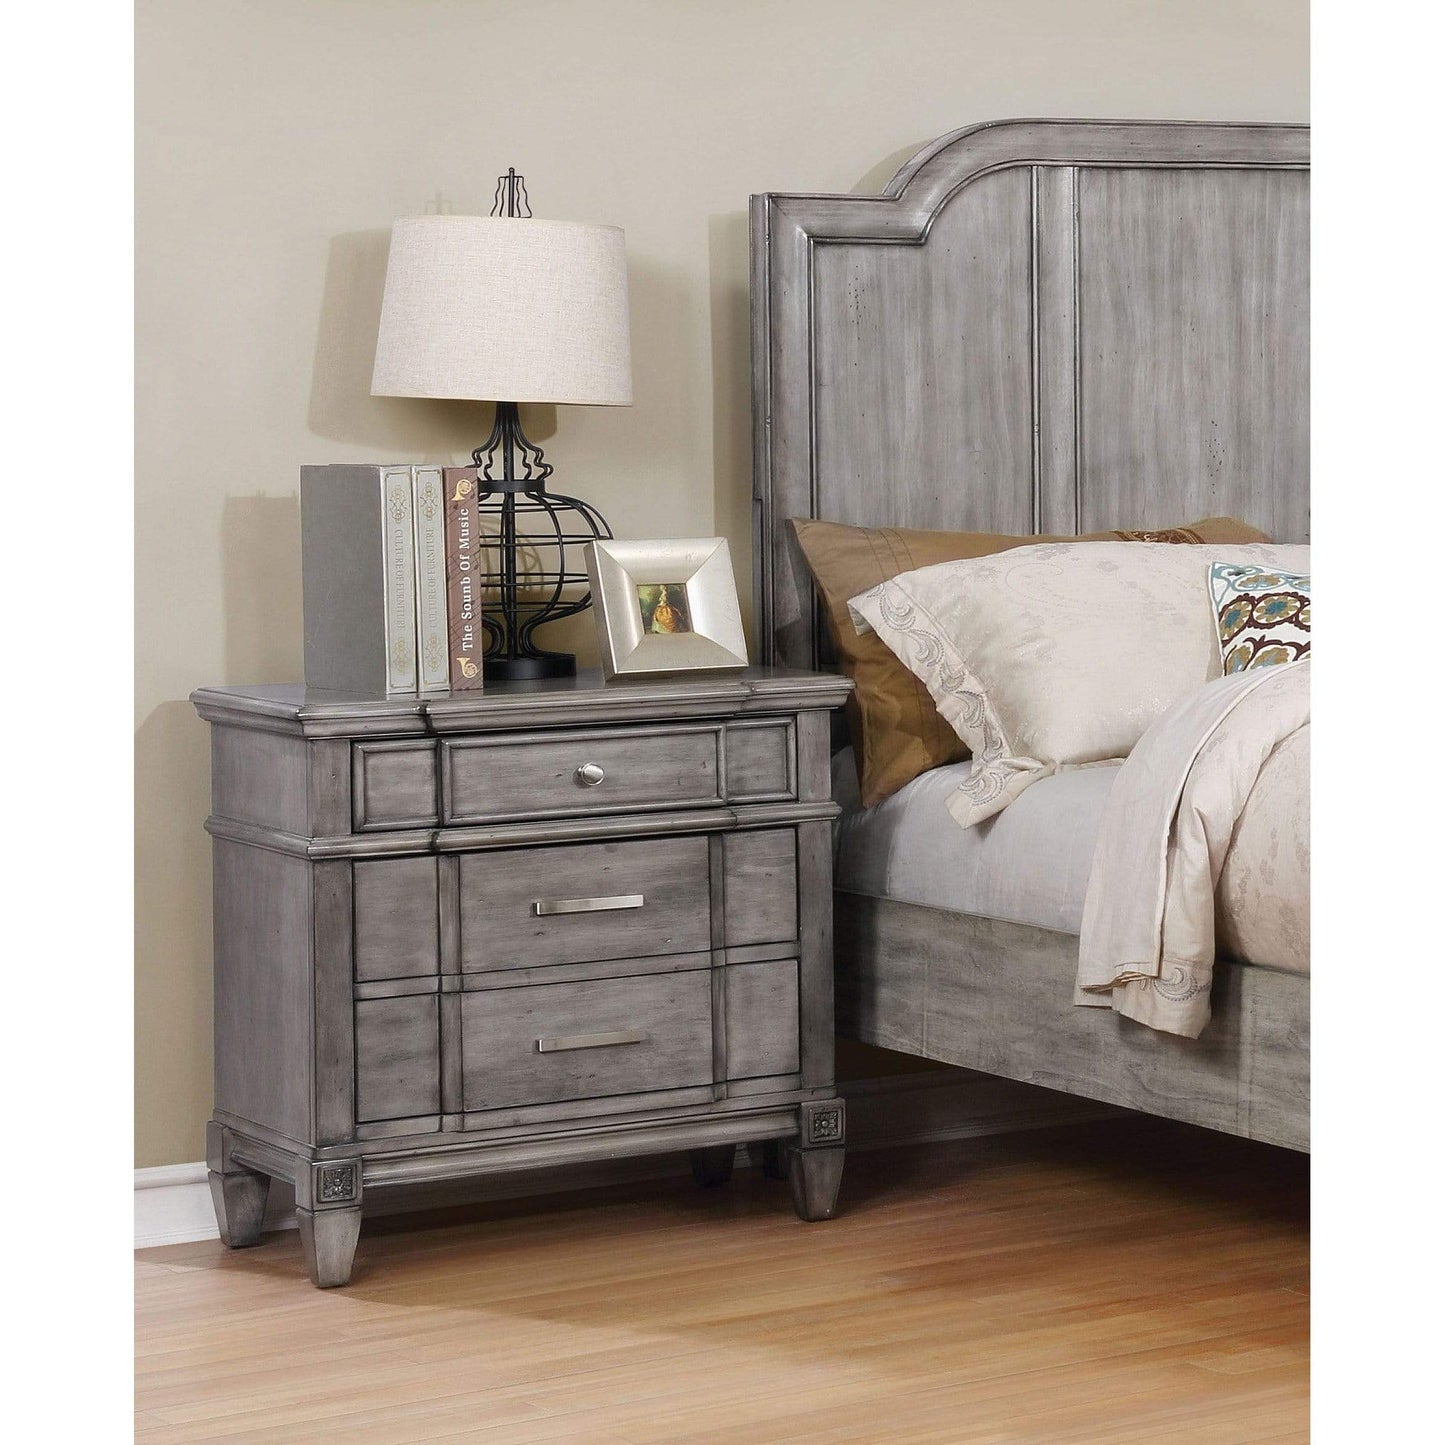 Furniture of America Nightstand Coster Transitional Style Gray, 3-Drawer Nightstand